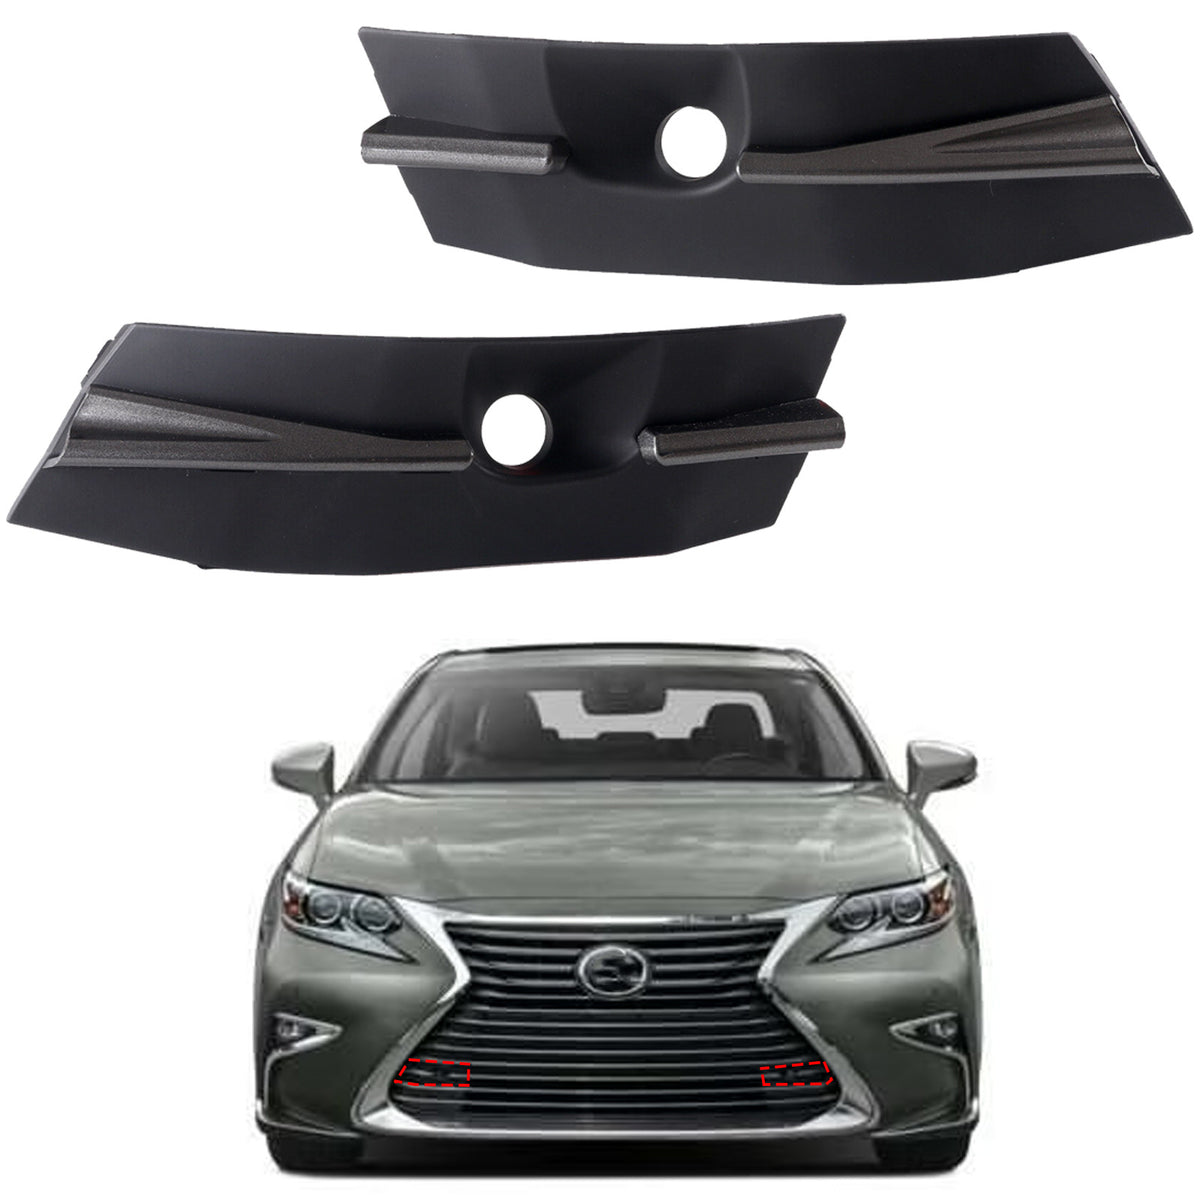 2016 2017 2018 Lexus ES300h u0026 ES350 Front Lower Grille Cover Inserts with  Sensor Holes Left Right Pair by AutoModed